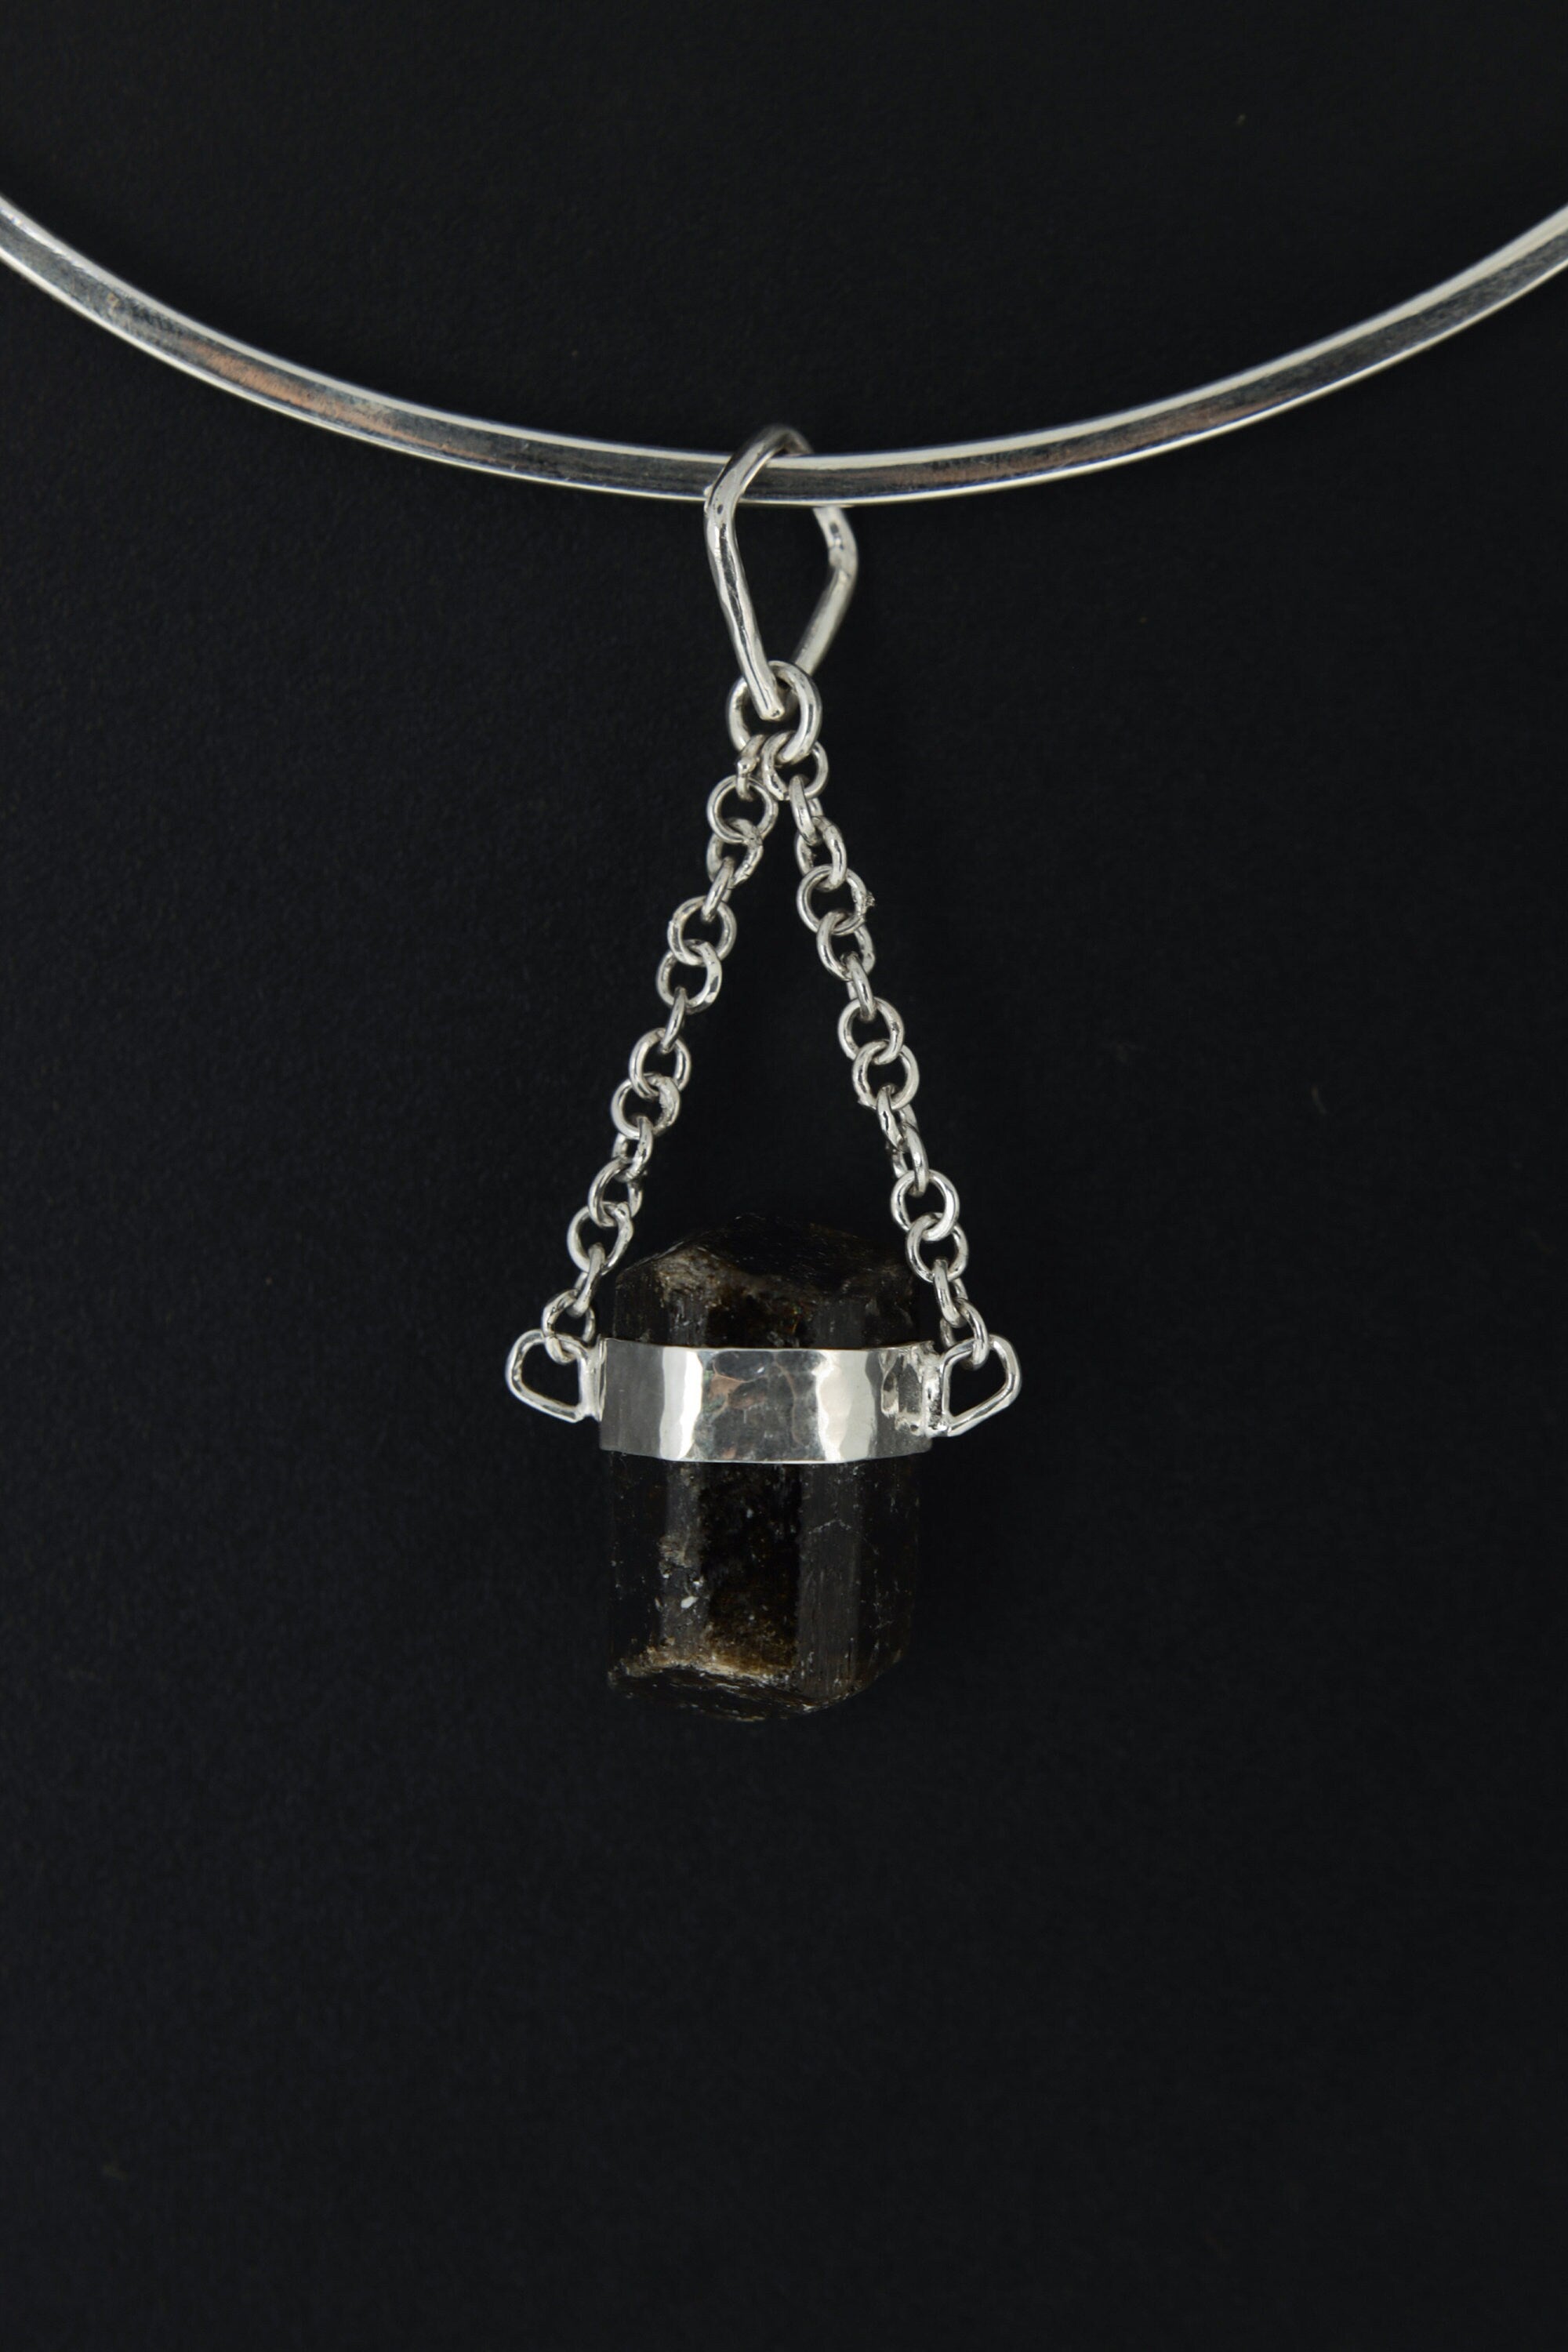 Double Terminated Black Tourmaline Pendant, Wrapped Textured Silver, Chain Bail, Sterling Silver Crystal Charm, Protective Energy, N0/03